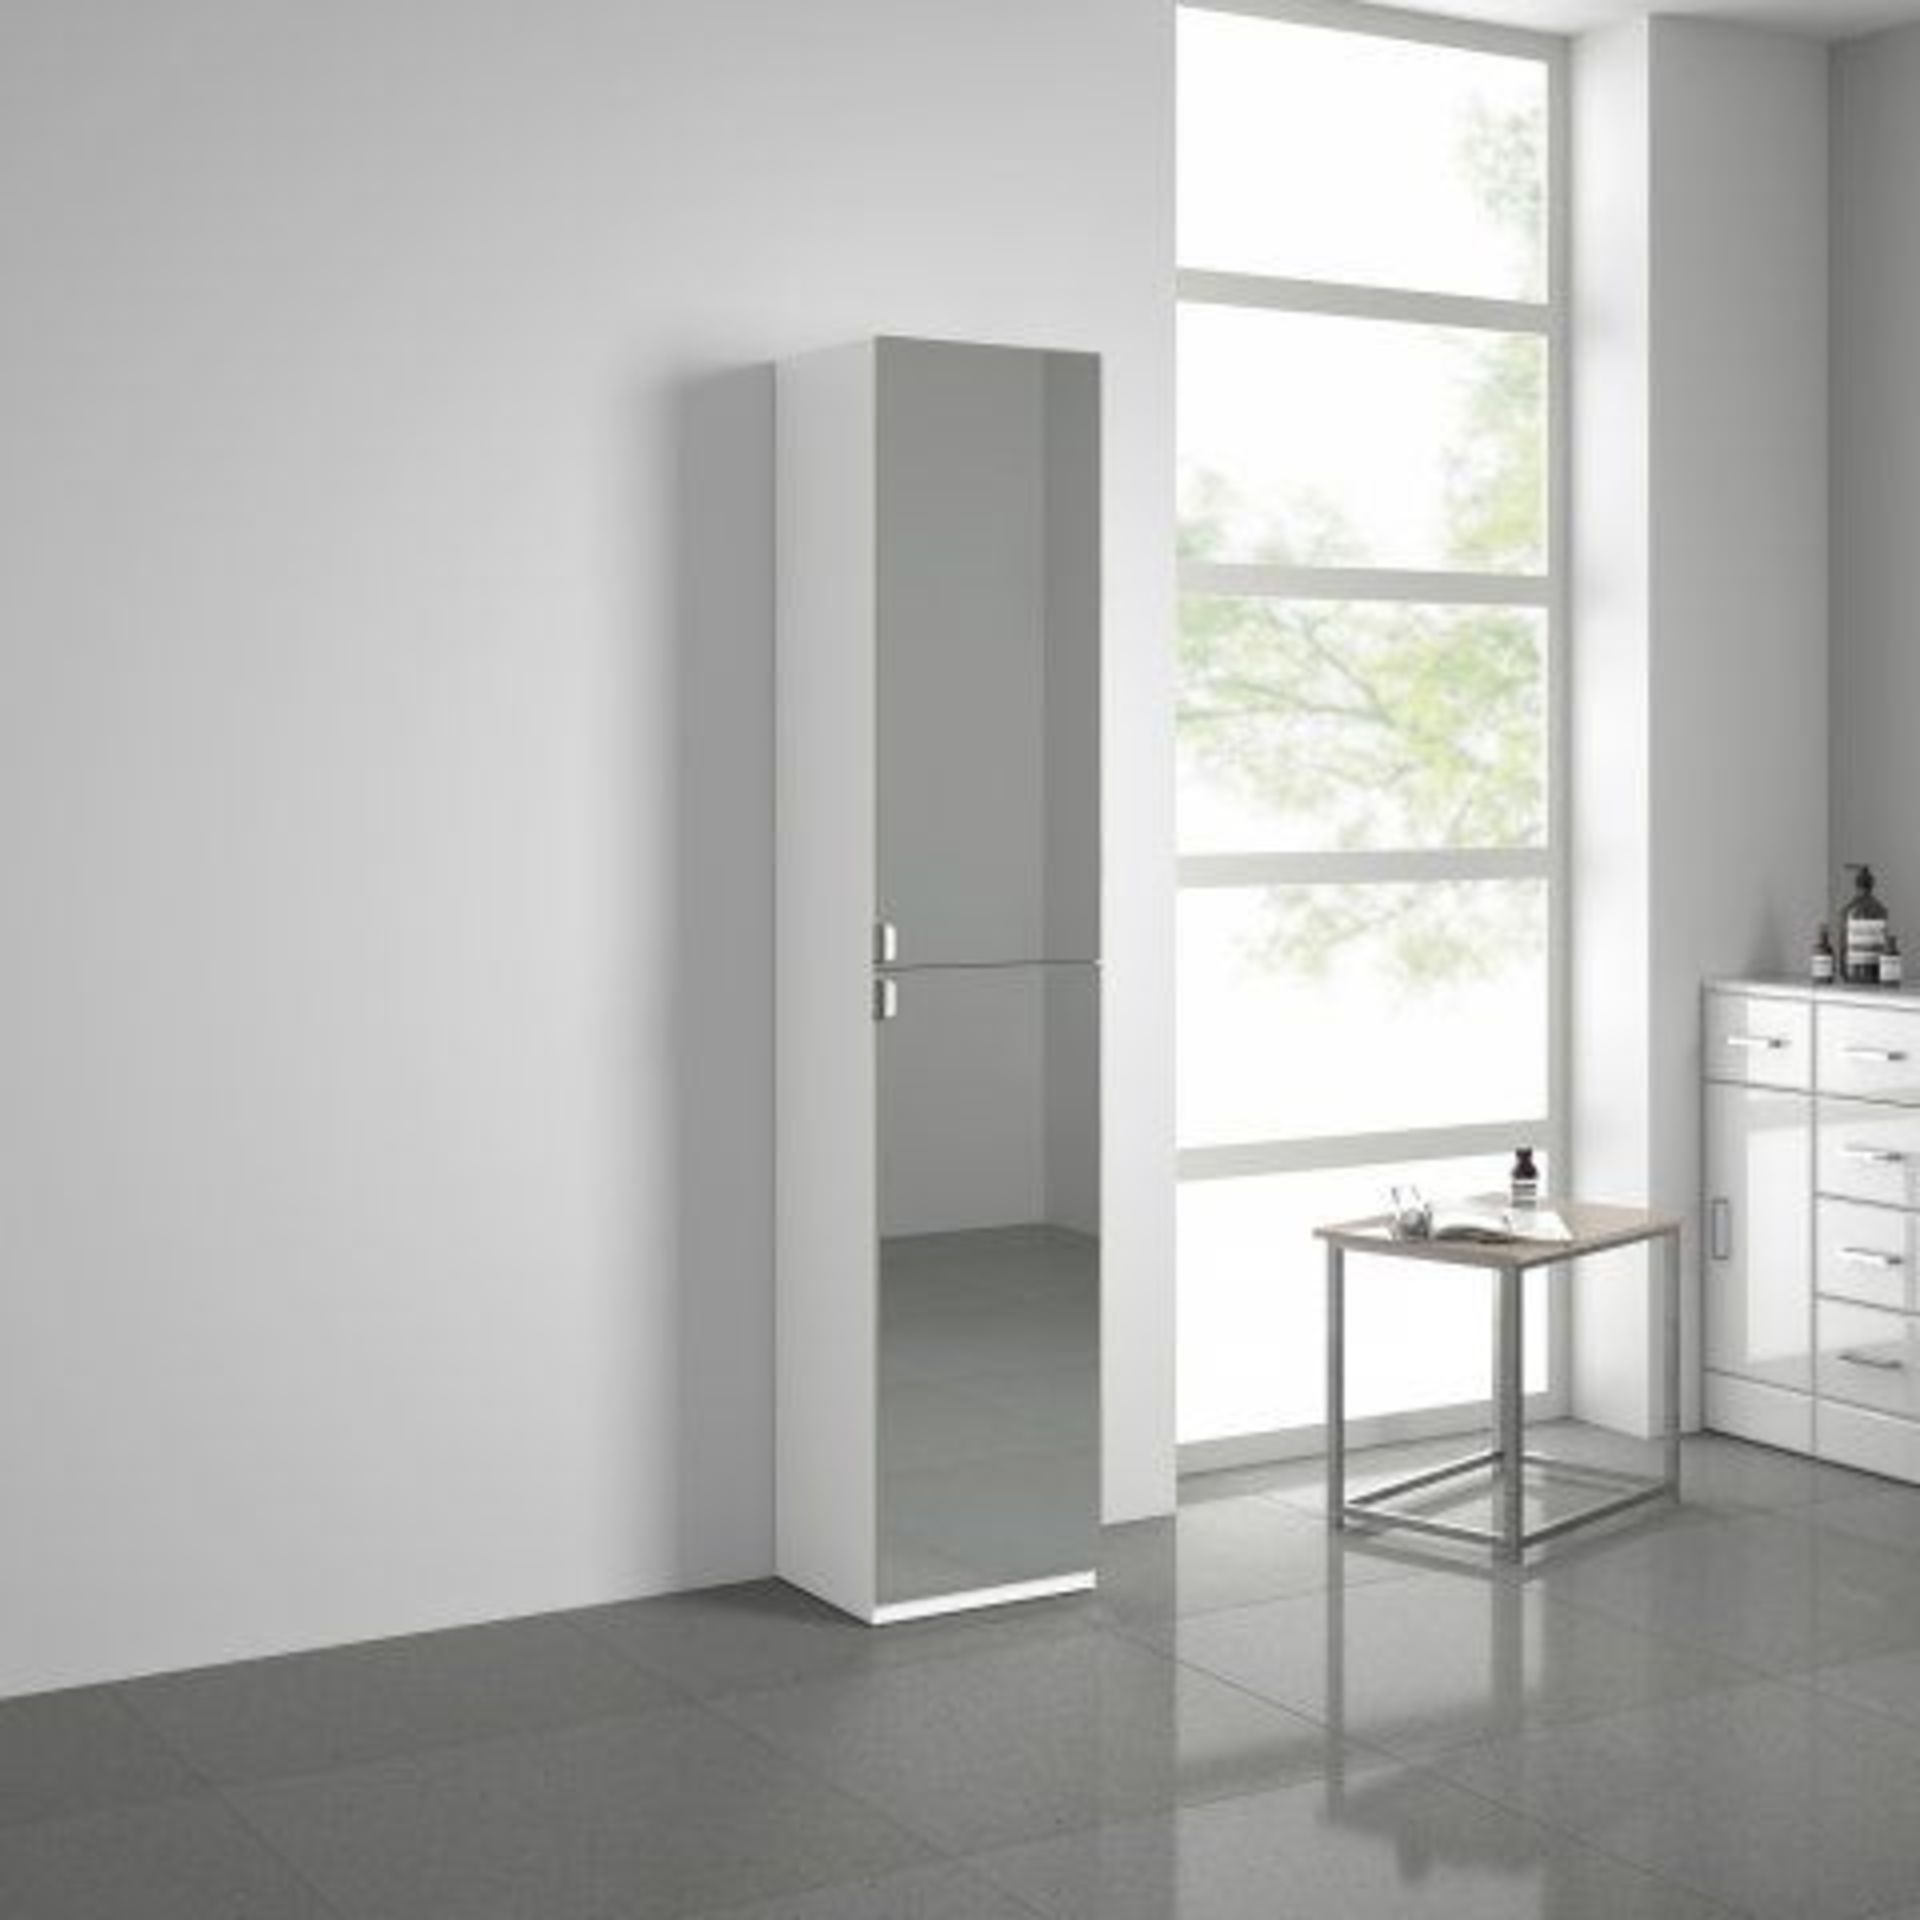 New & Boxed Matte White Mirrored Door Tall Cabinet. Mc153 RRP £424.99. Enjoy The Benefits Of...